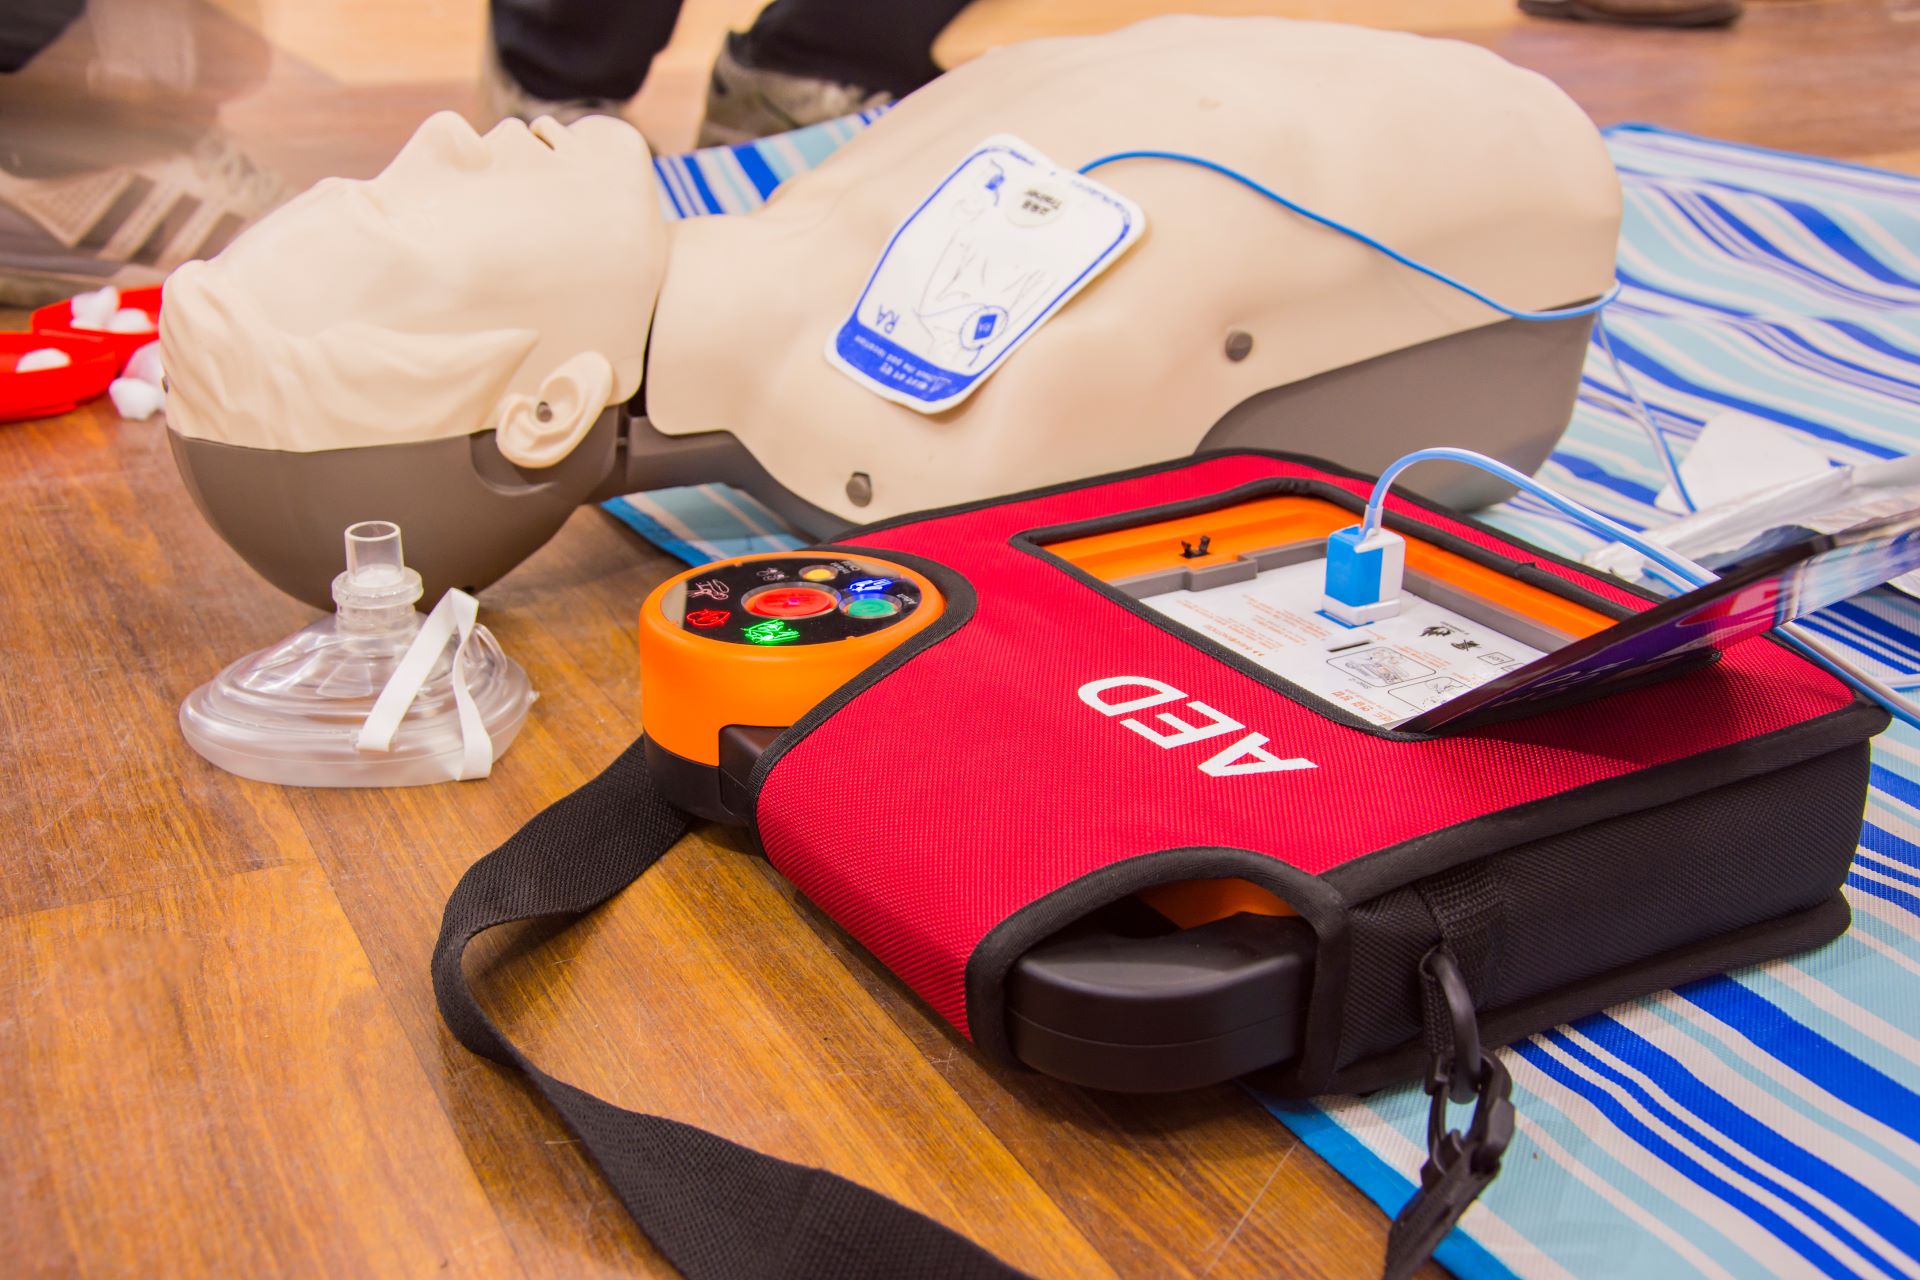 cpr with aed training and blur background